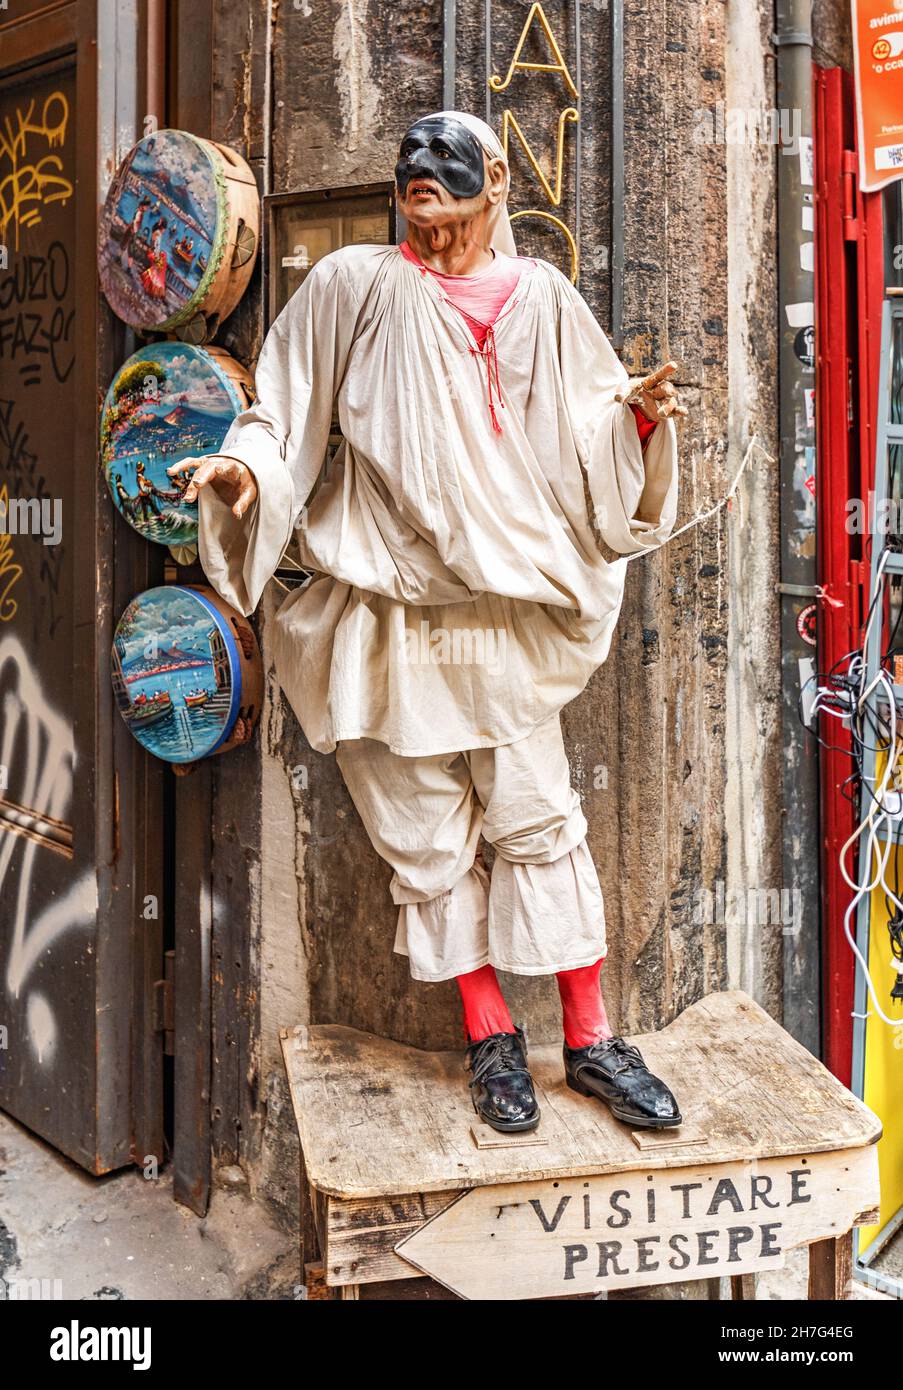 Naples, Italy - june 29 2021: Pulcinella traditional Neapolitan theater mask in San Gregorio Armeno street, historic center of Naples city and the fam Stock Photo